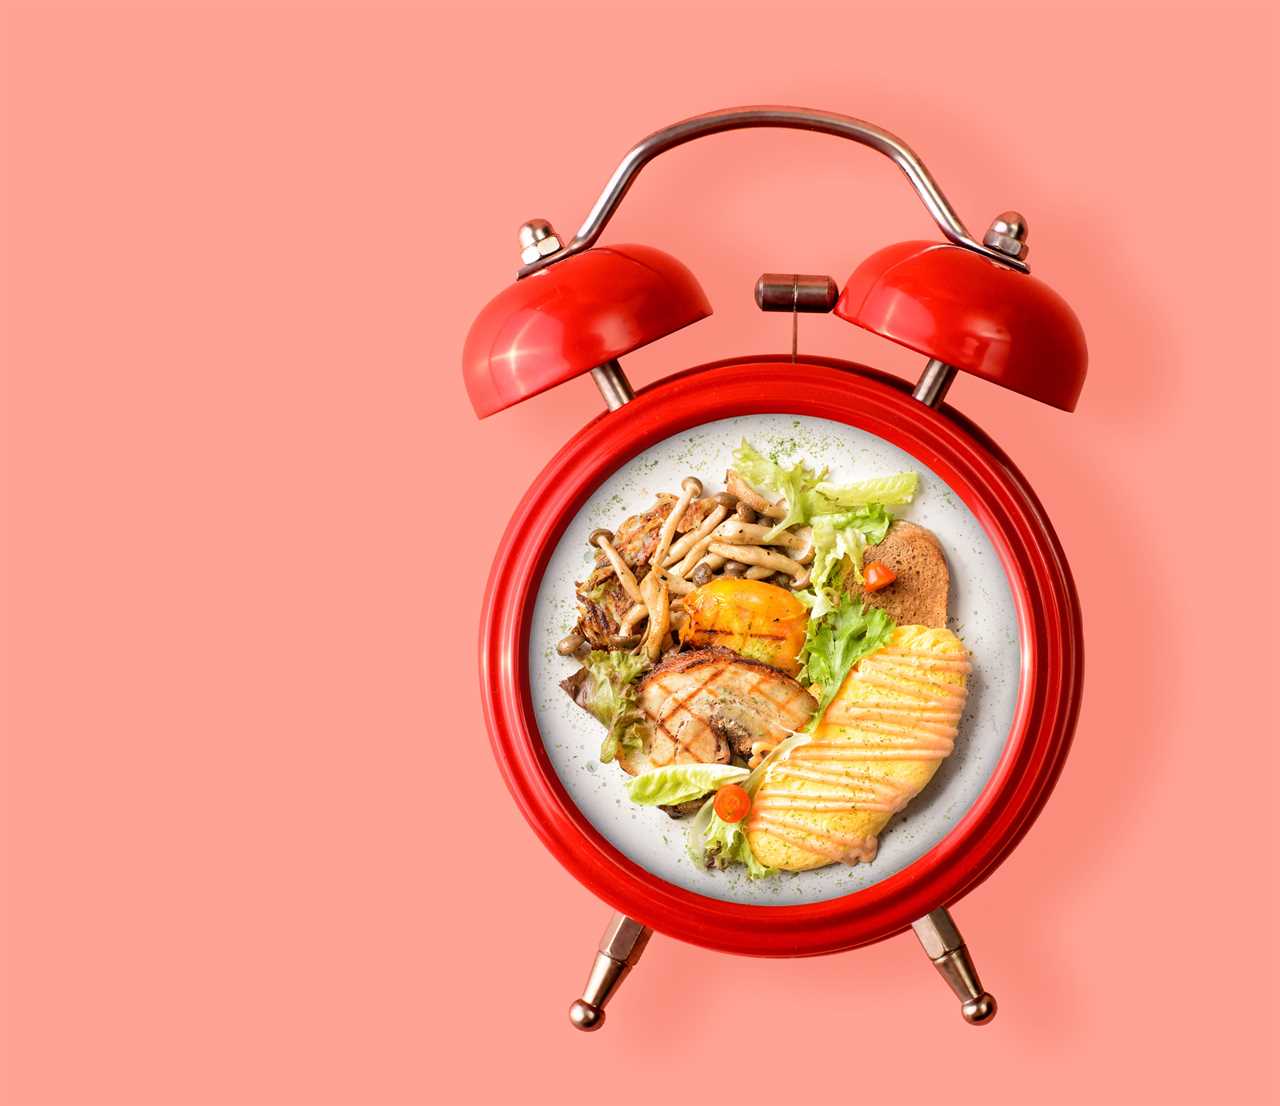 The 5-day Diet that Can Turn Back the Clock on Ageing and Disease Risks